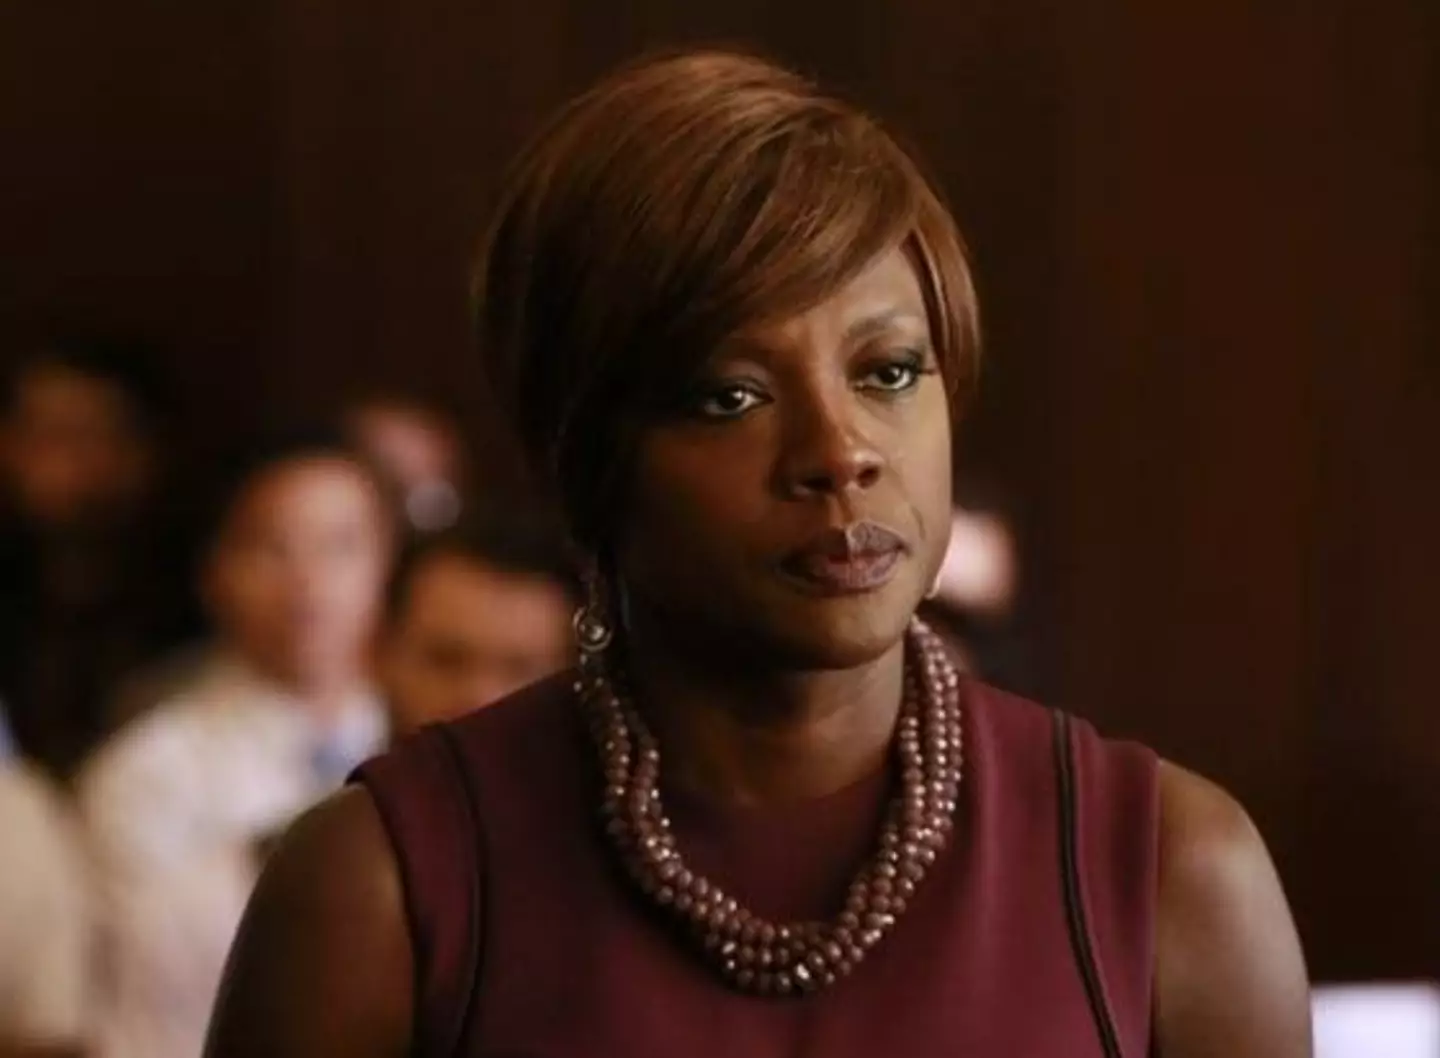 Viola Davis plays a criminal defence lawyer in the series.